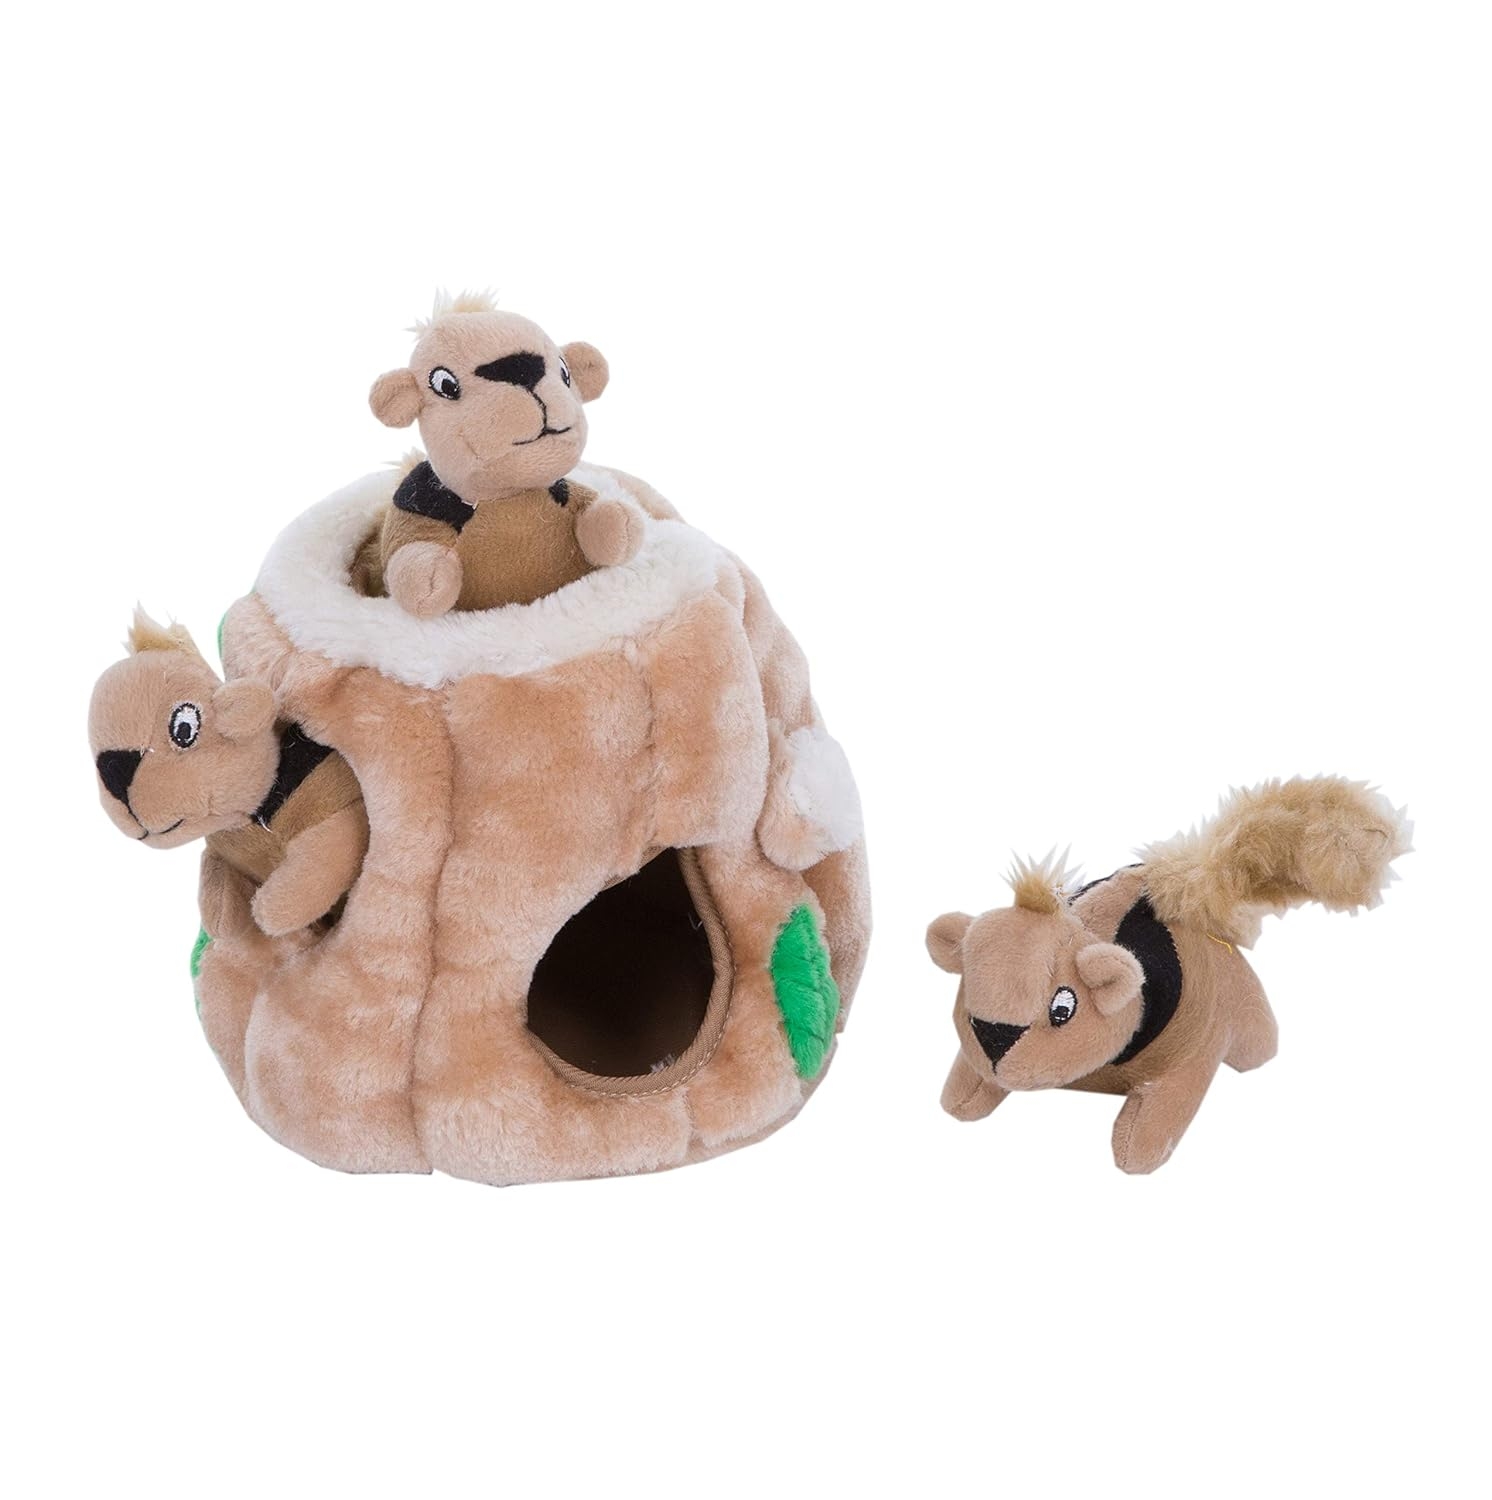 Outward Hound Interactive Puzzle Toy – Plush Hide and Seek Activity for Dogs